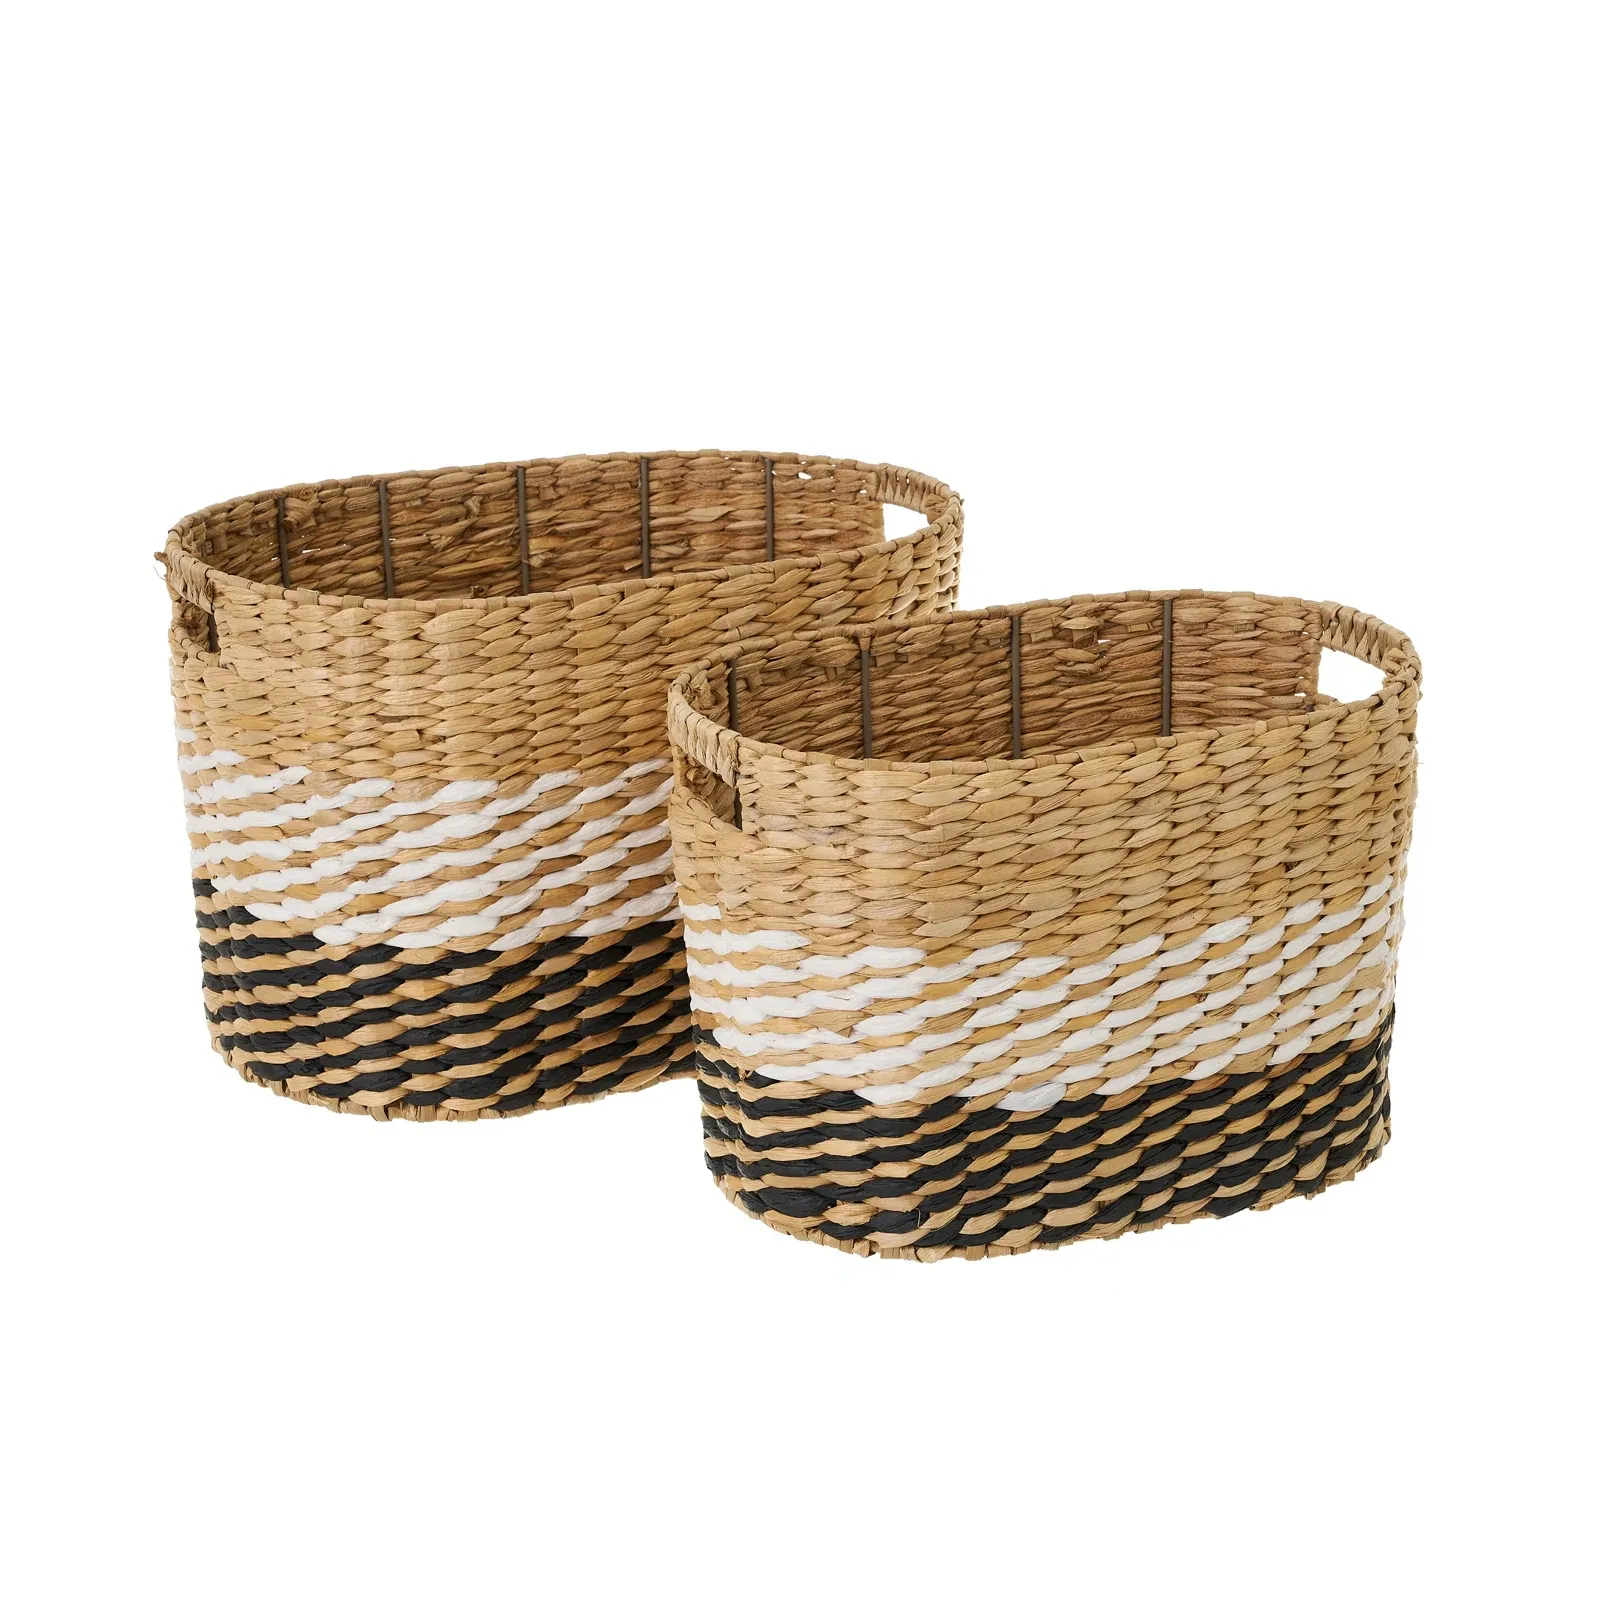 Latest Collection Wooden seagrass Woven Baskets Suppliers Storage Boxes Bins Laundry Baskets seagrass Japan Style Storage Org